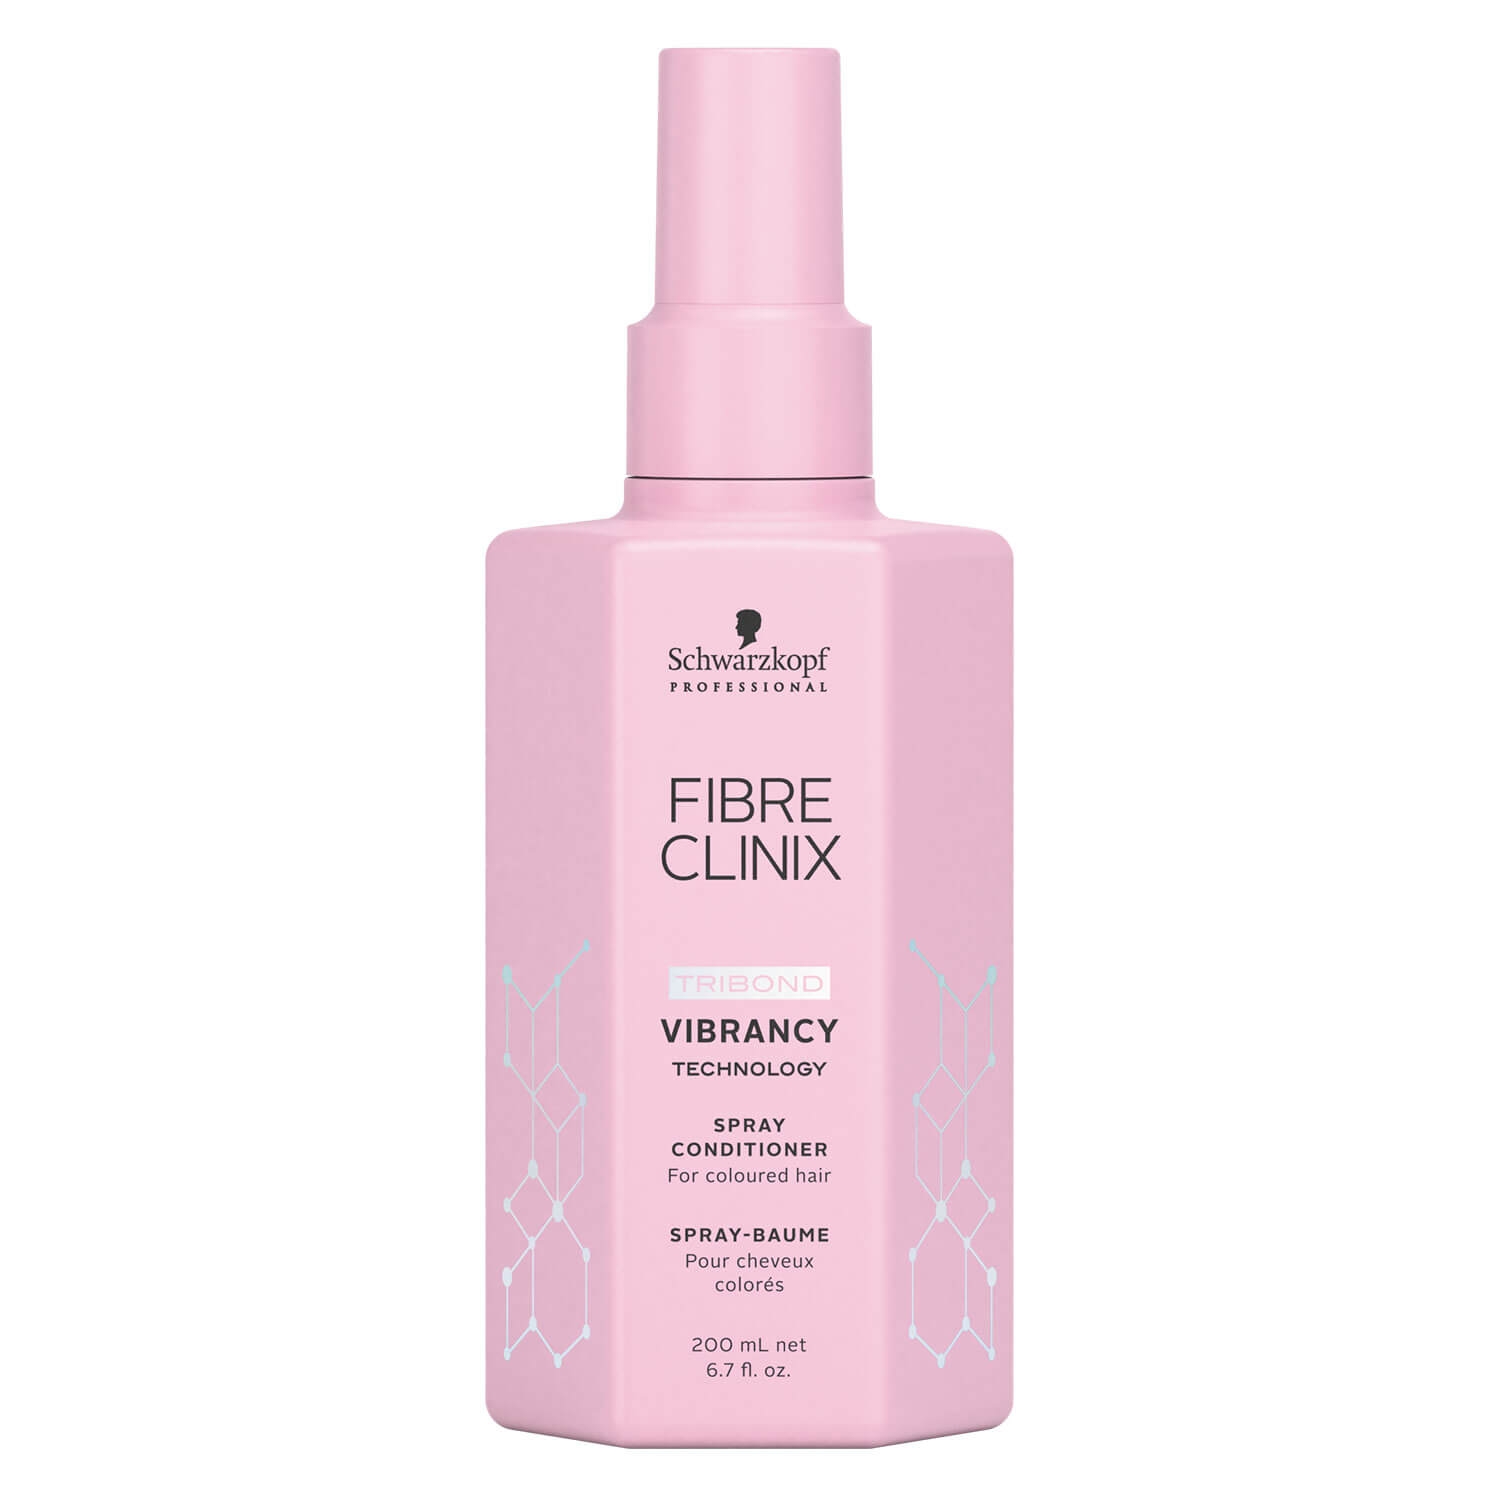 Product image from Fibre Clinix - Vibrancy Spray Conditioner